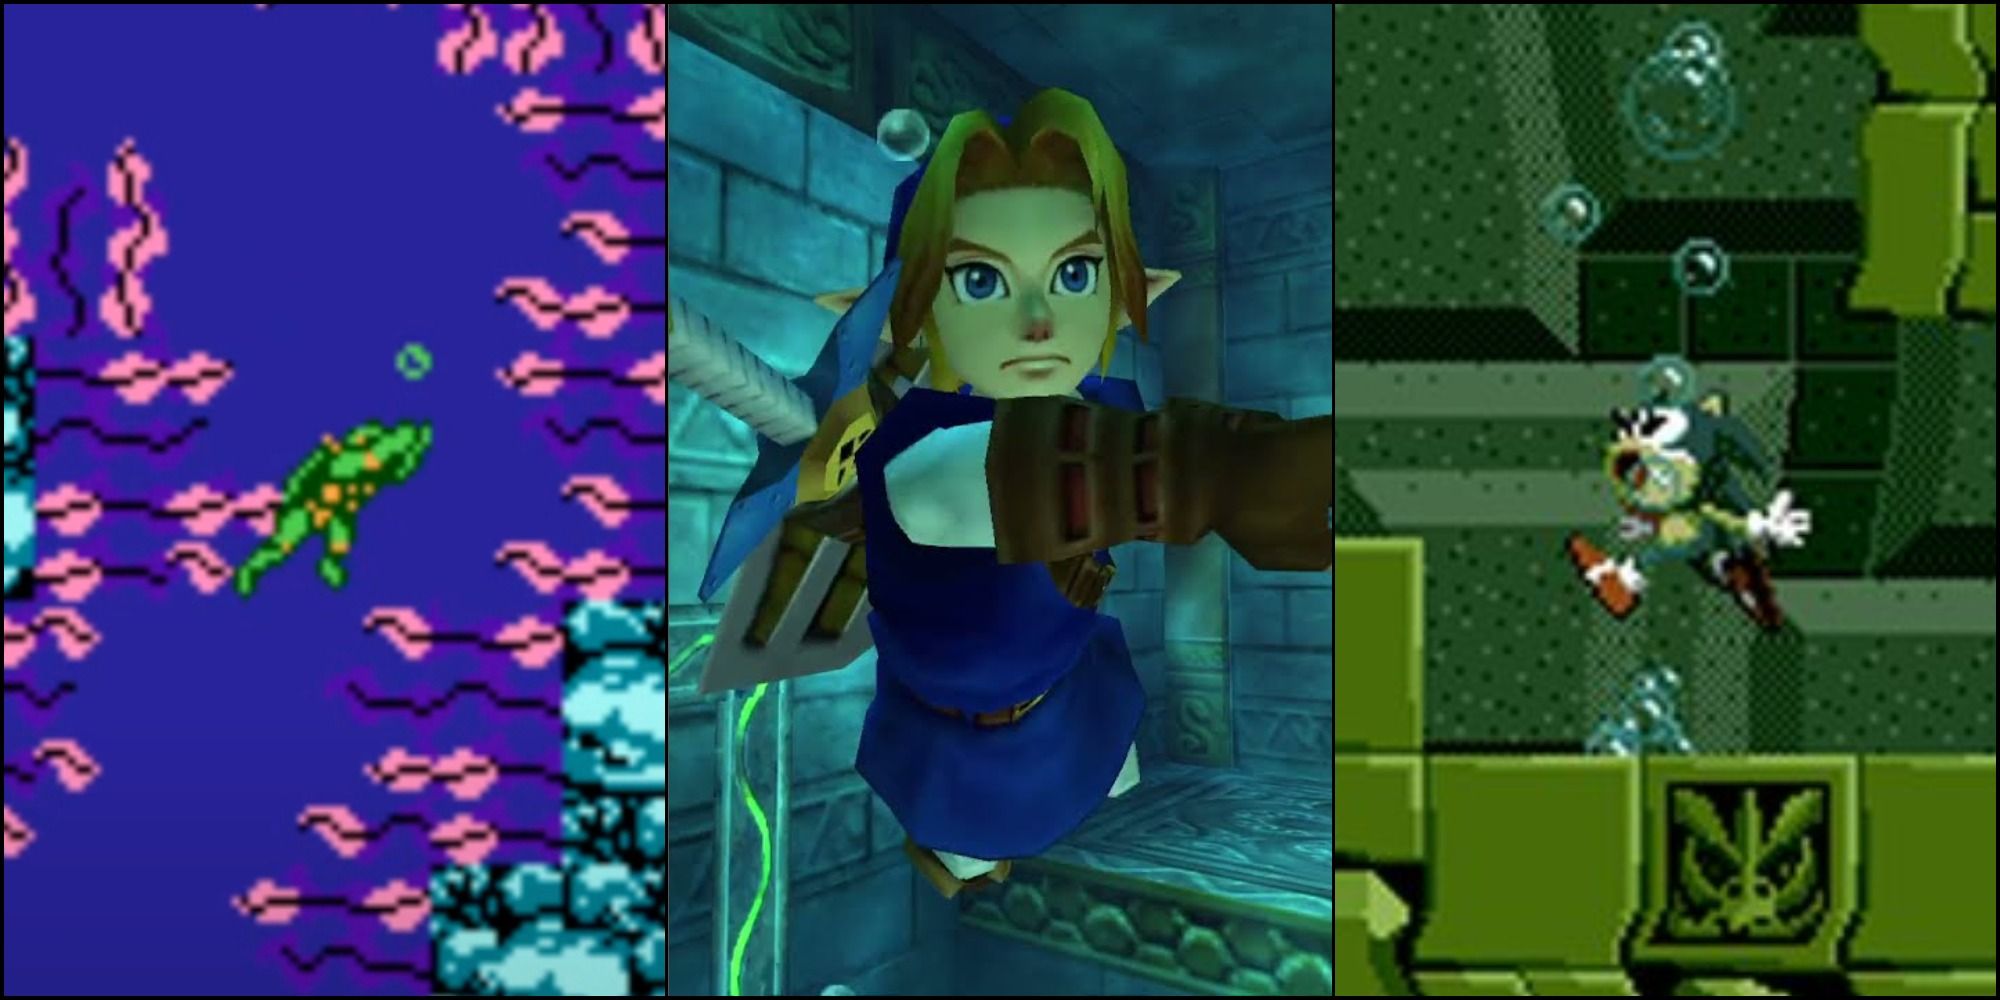 Water Levels We Don't Hate featuring TMNT, Zelda, and Sonic.